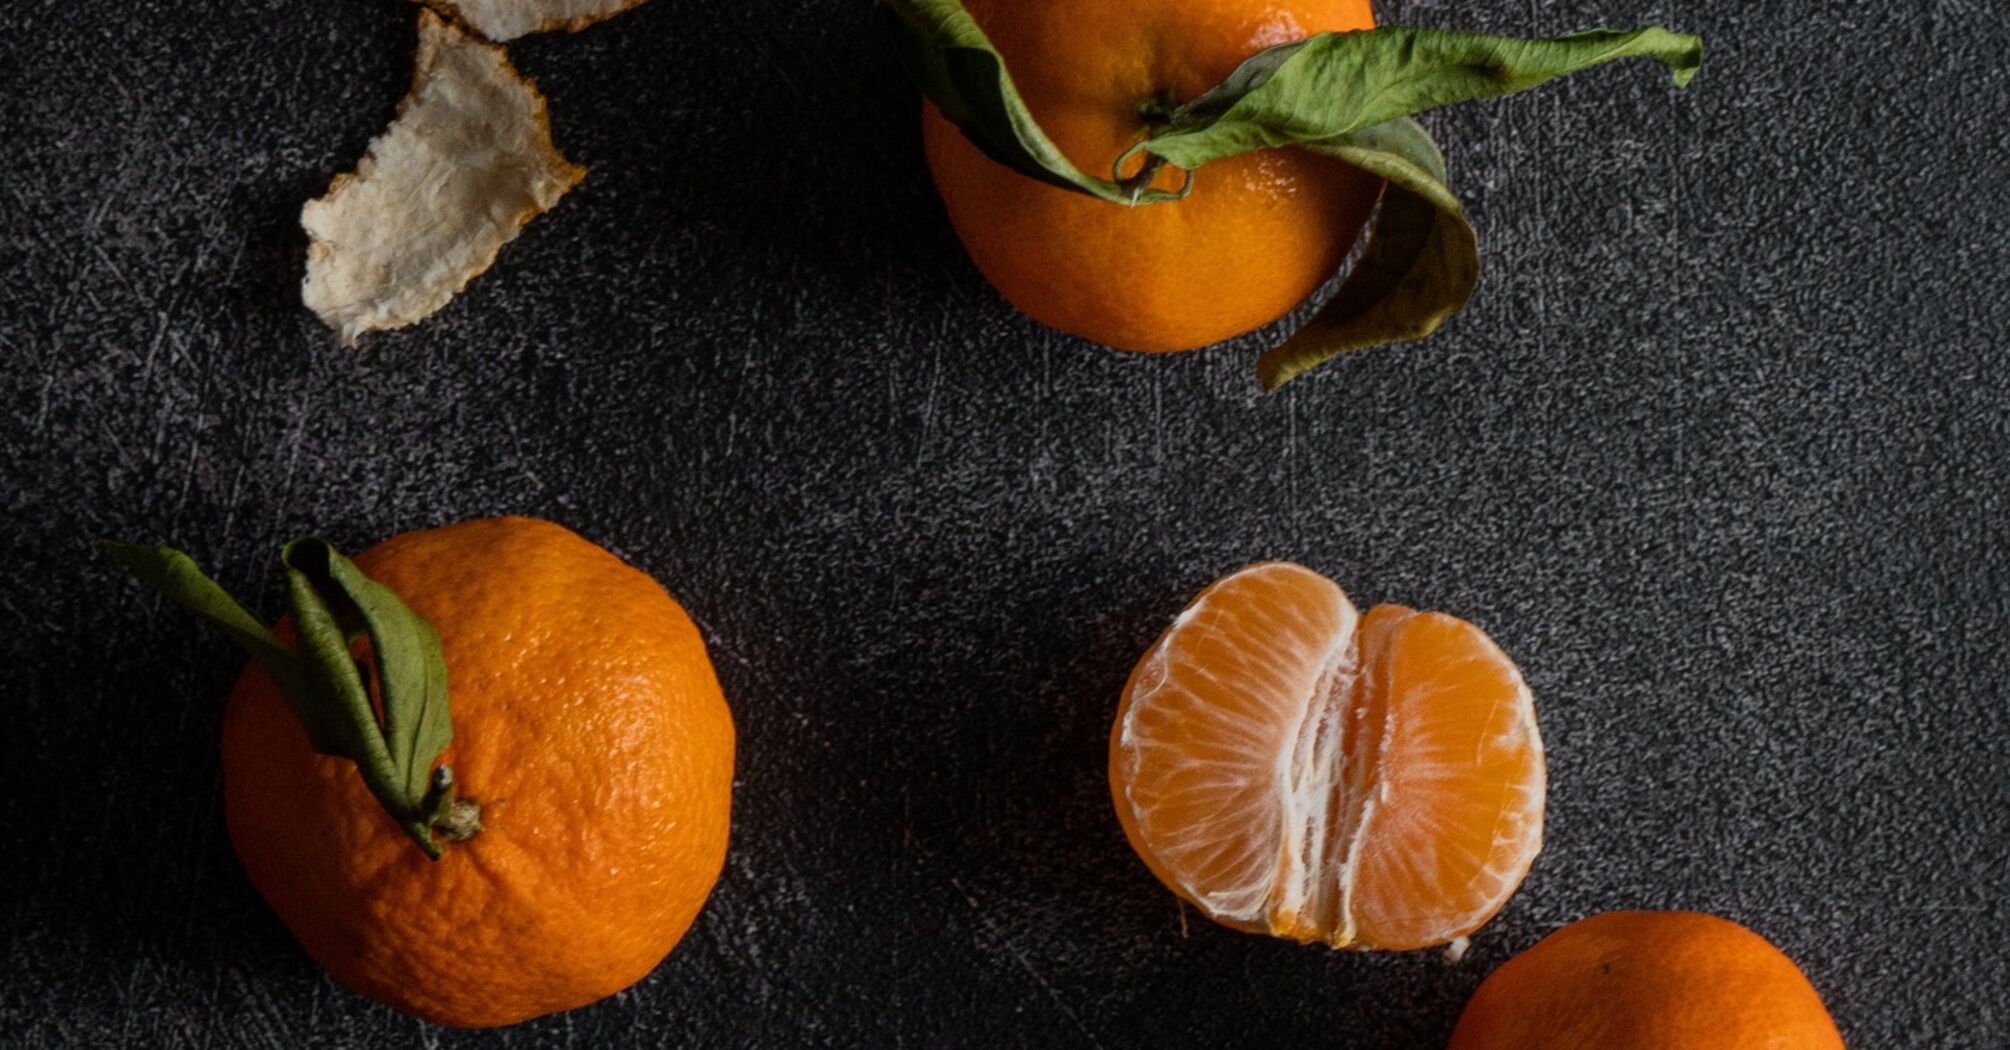 How to choose the best ripe tangerines?